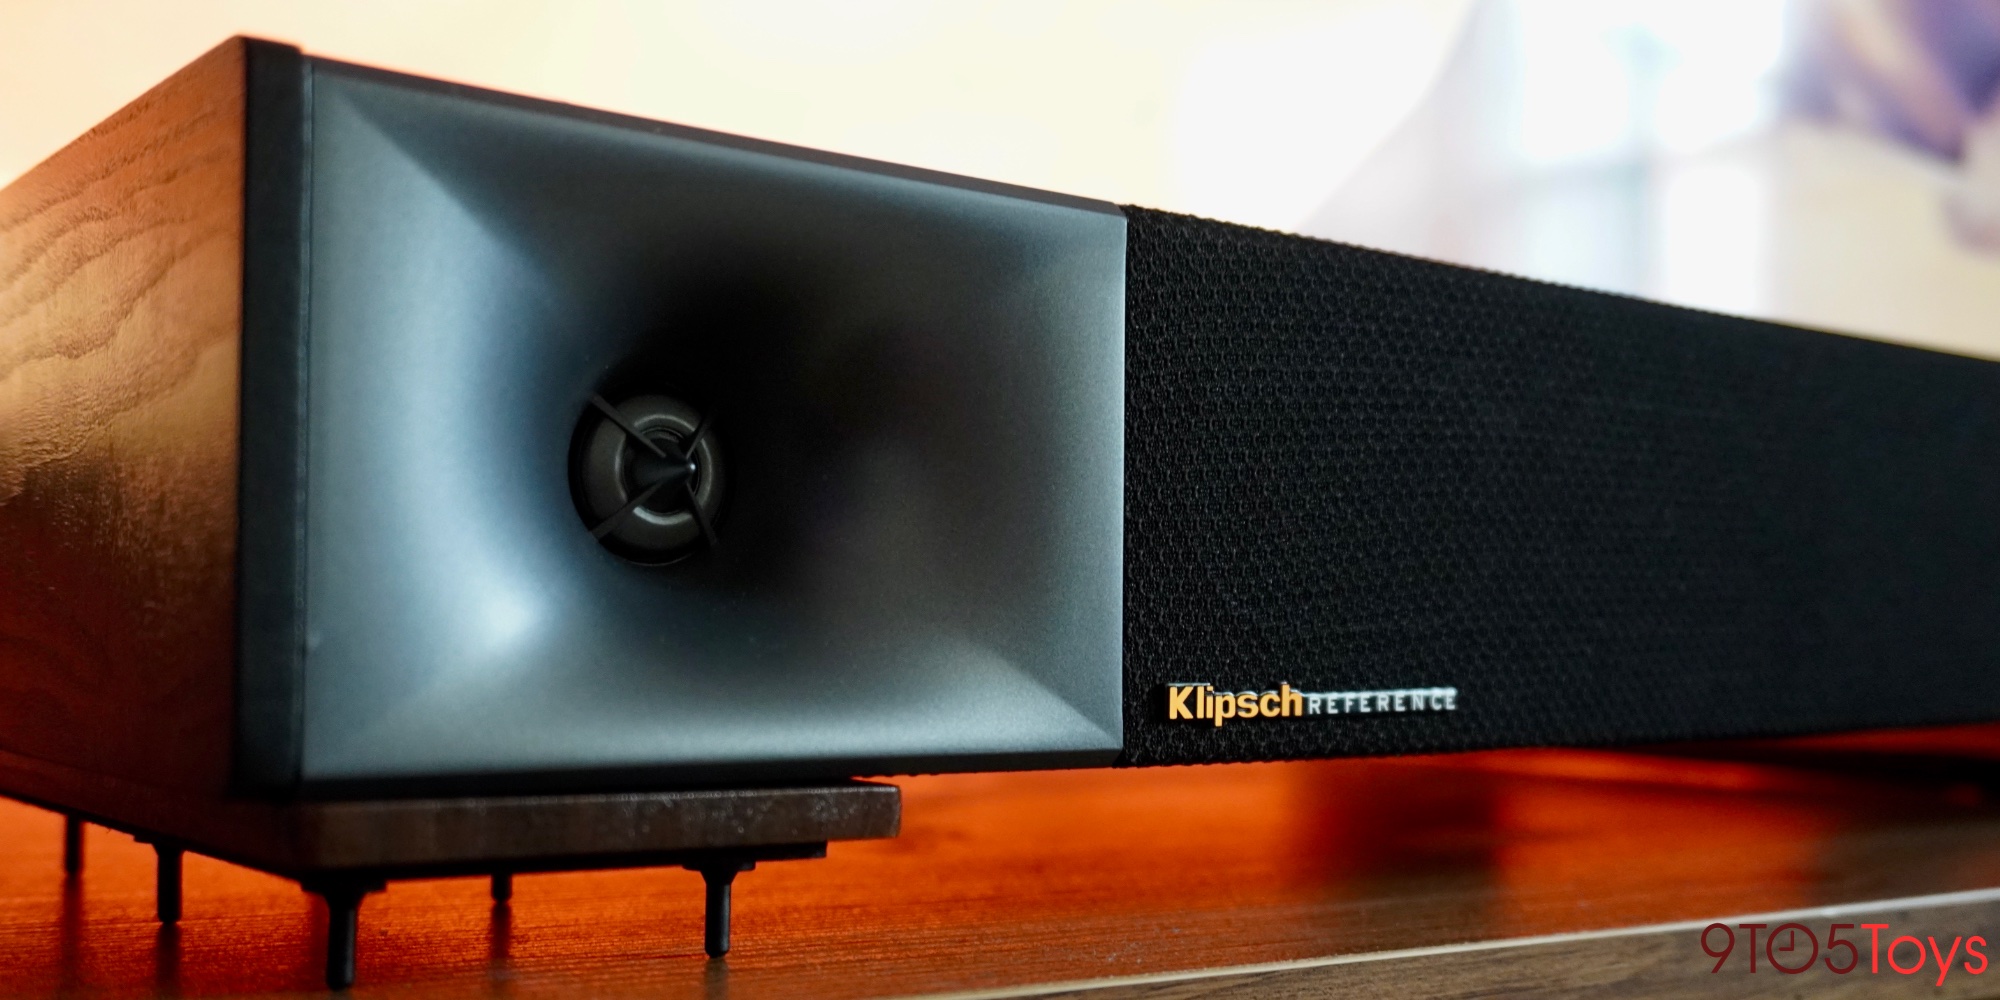 Klipsch review: A true theater upgrade - 9to5Toys